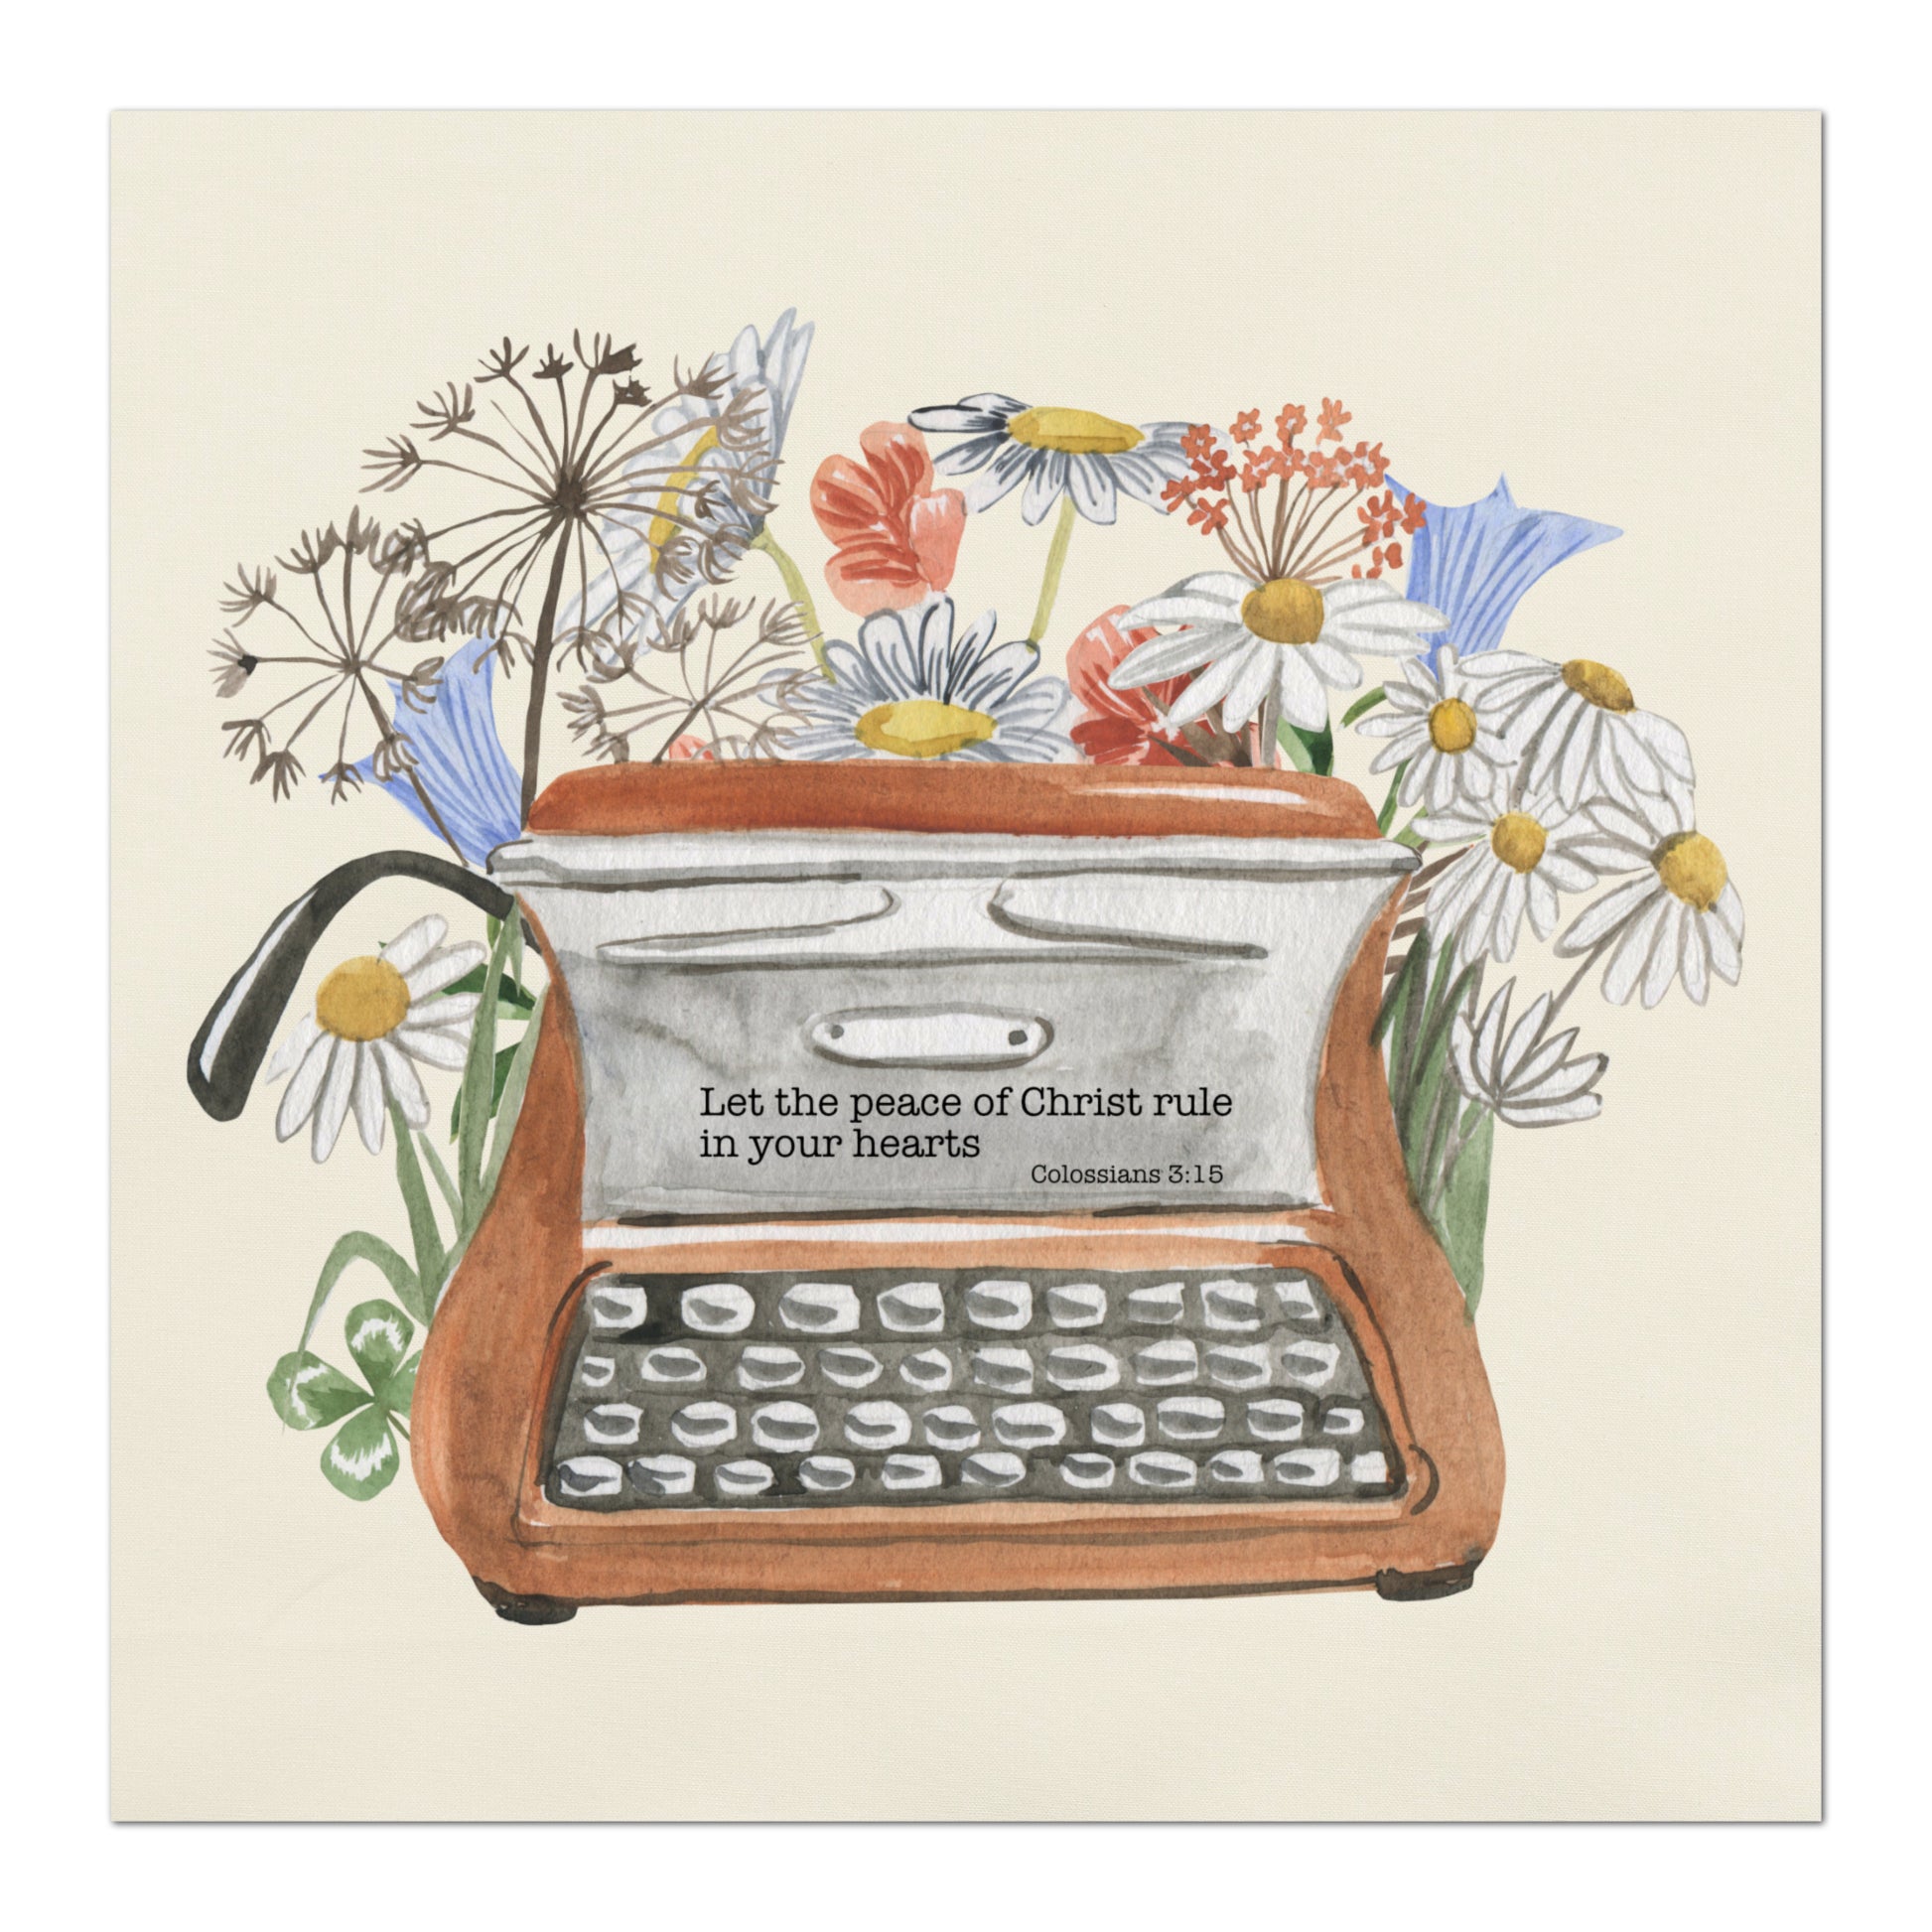 Watercolor Typewriter with flowers - Let the peace of Christ rule in your hearts - Colossians 3:15